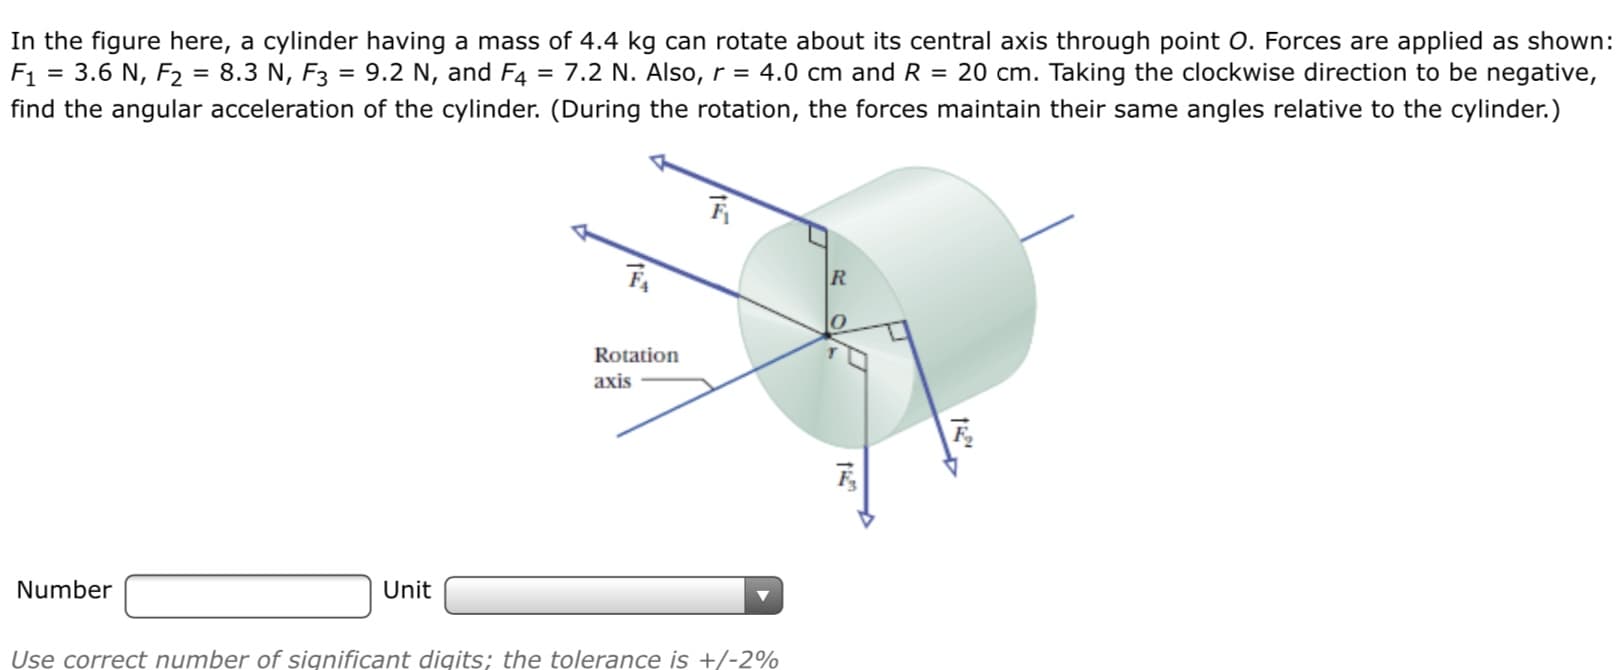 In the figure here, a cylinder having a mass of 4.4 kg can rotate about its central axis through point O. Forces are applied as shown:
F1 = 3.6 N, F2 = 8.3 N, F3 = 9.2 N, and F4 = 7.2 N. Also, r = 4.0 cm and R = 20 cm. Taking the clockwise direction to be negative,
find the angular acceleration of the cylinder. (During the rotation, the forces maintain their same angles relative to the cylinder.)
Rotation
axis
